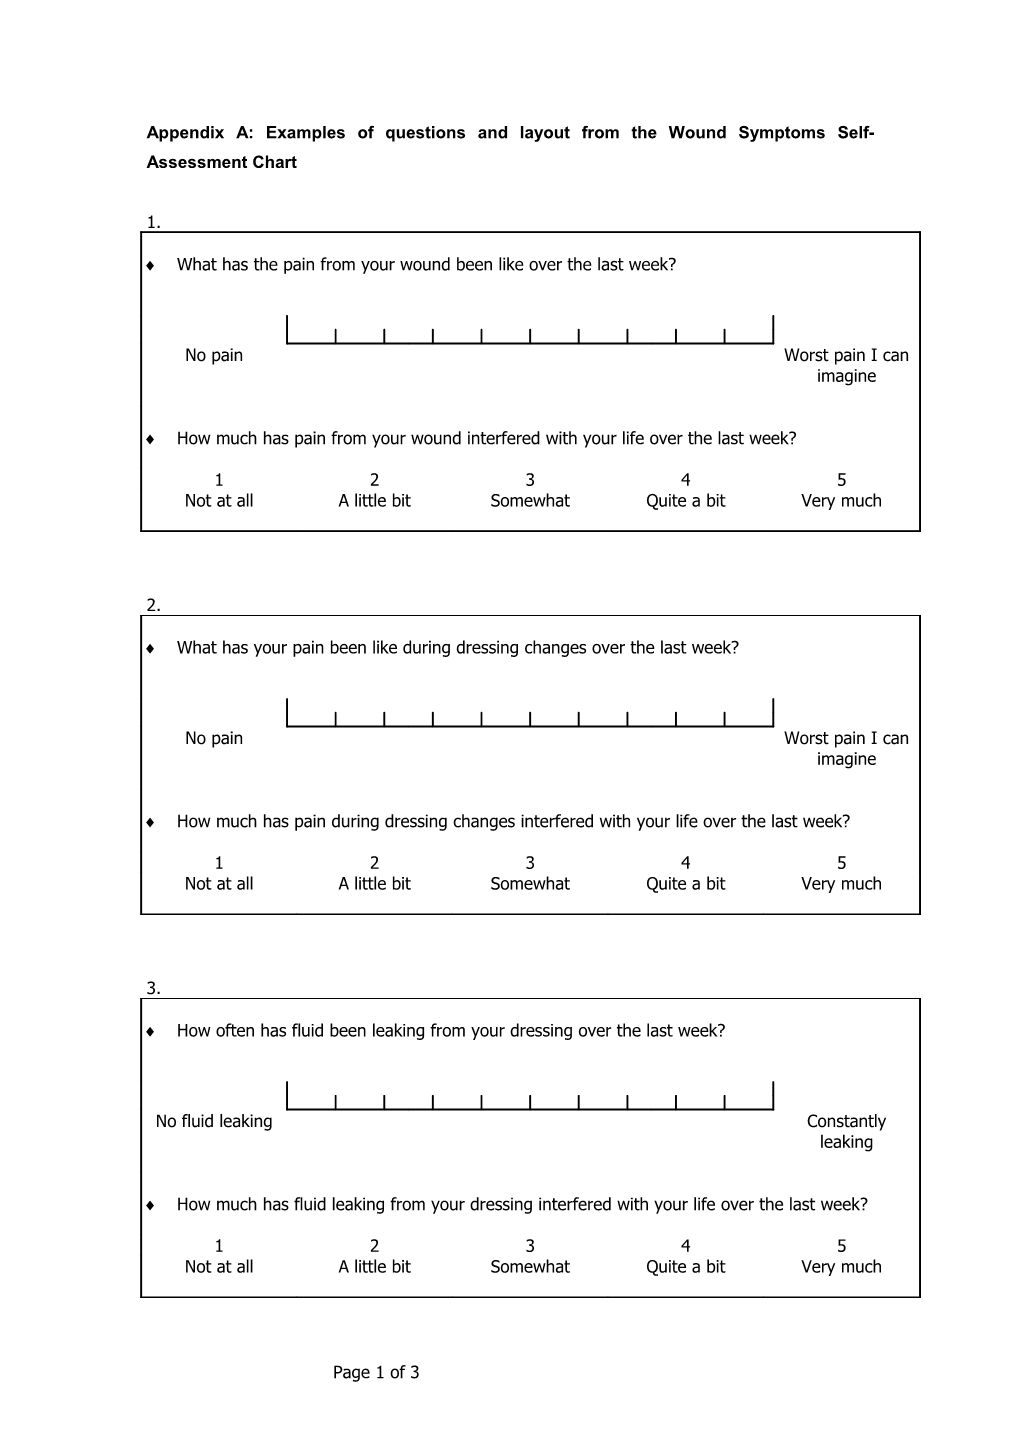 Appendix A: Examples of Questions and Layout from the Wound Symptoms Self-Assessment Chart